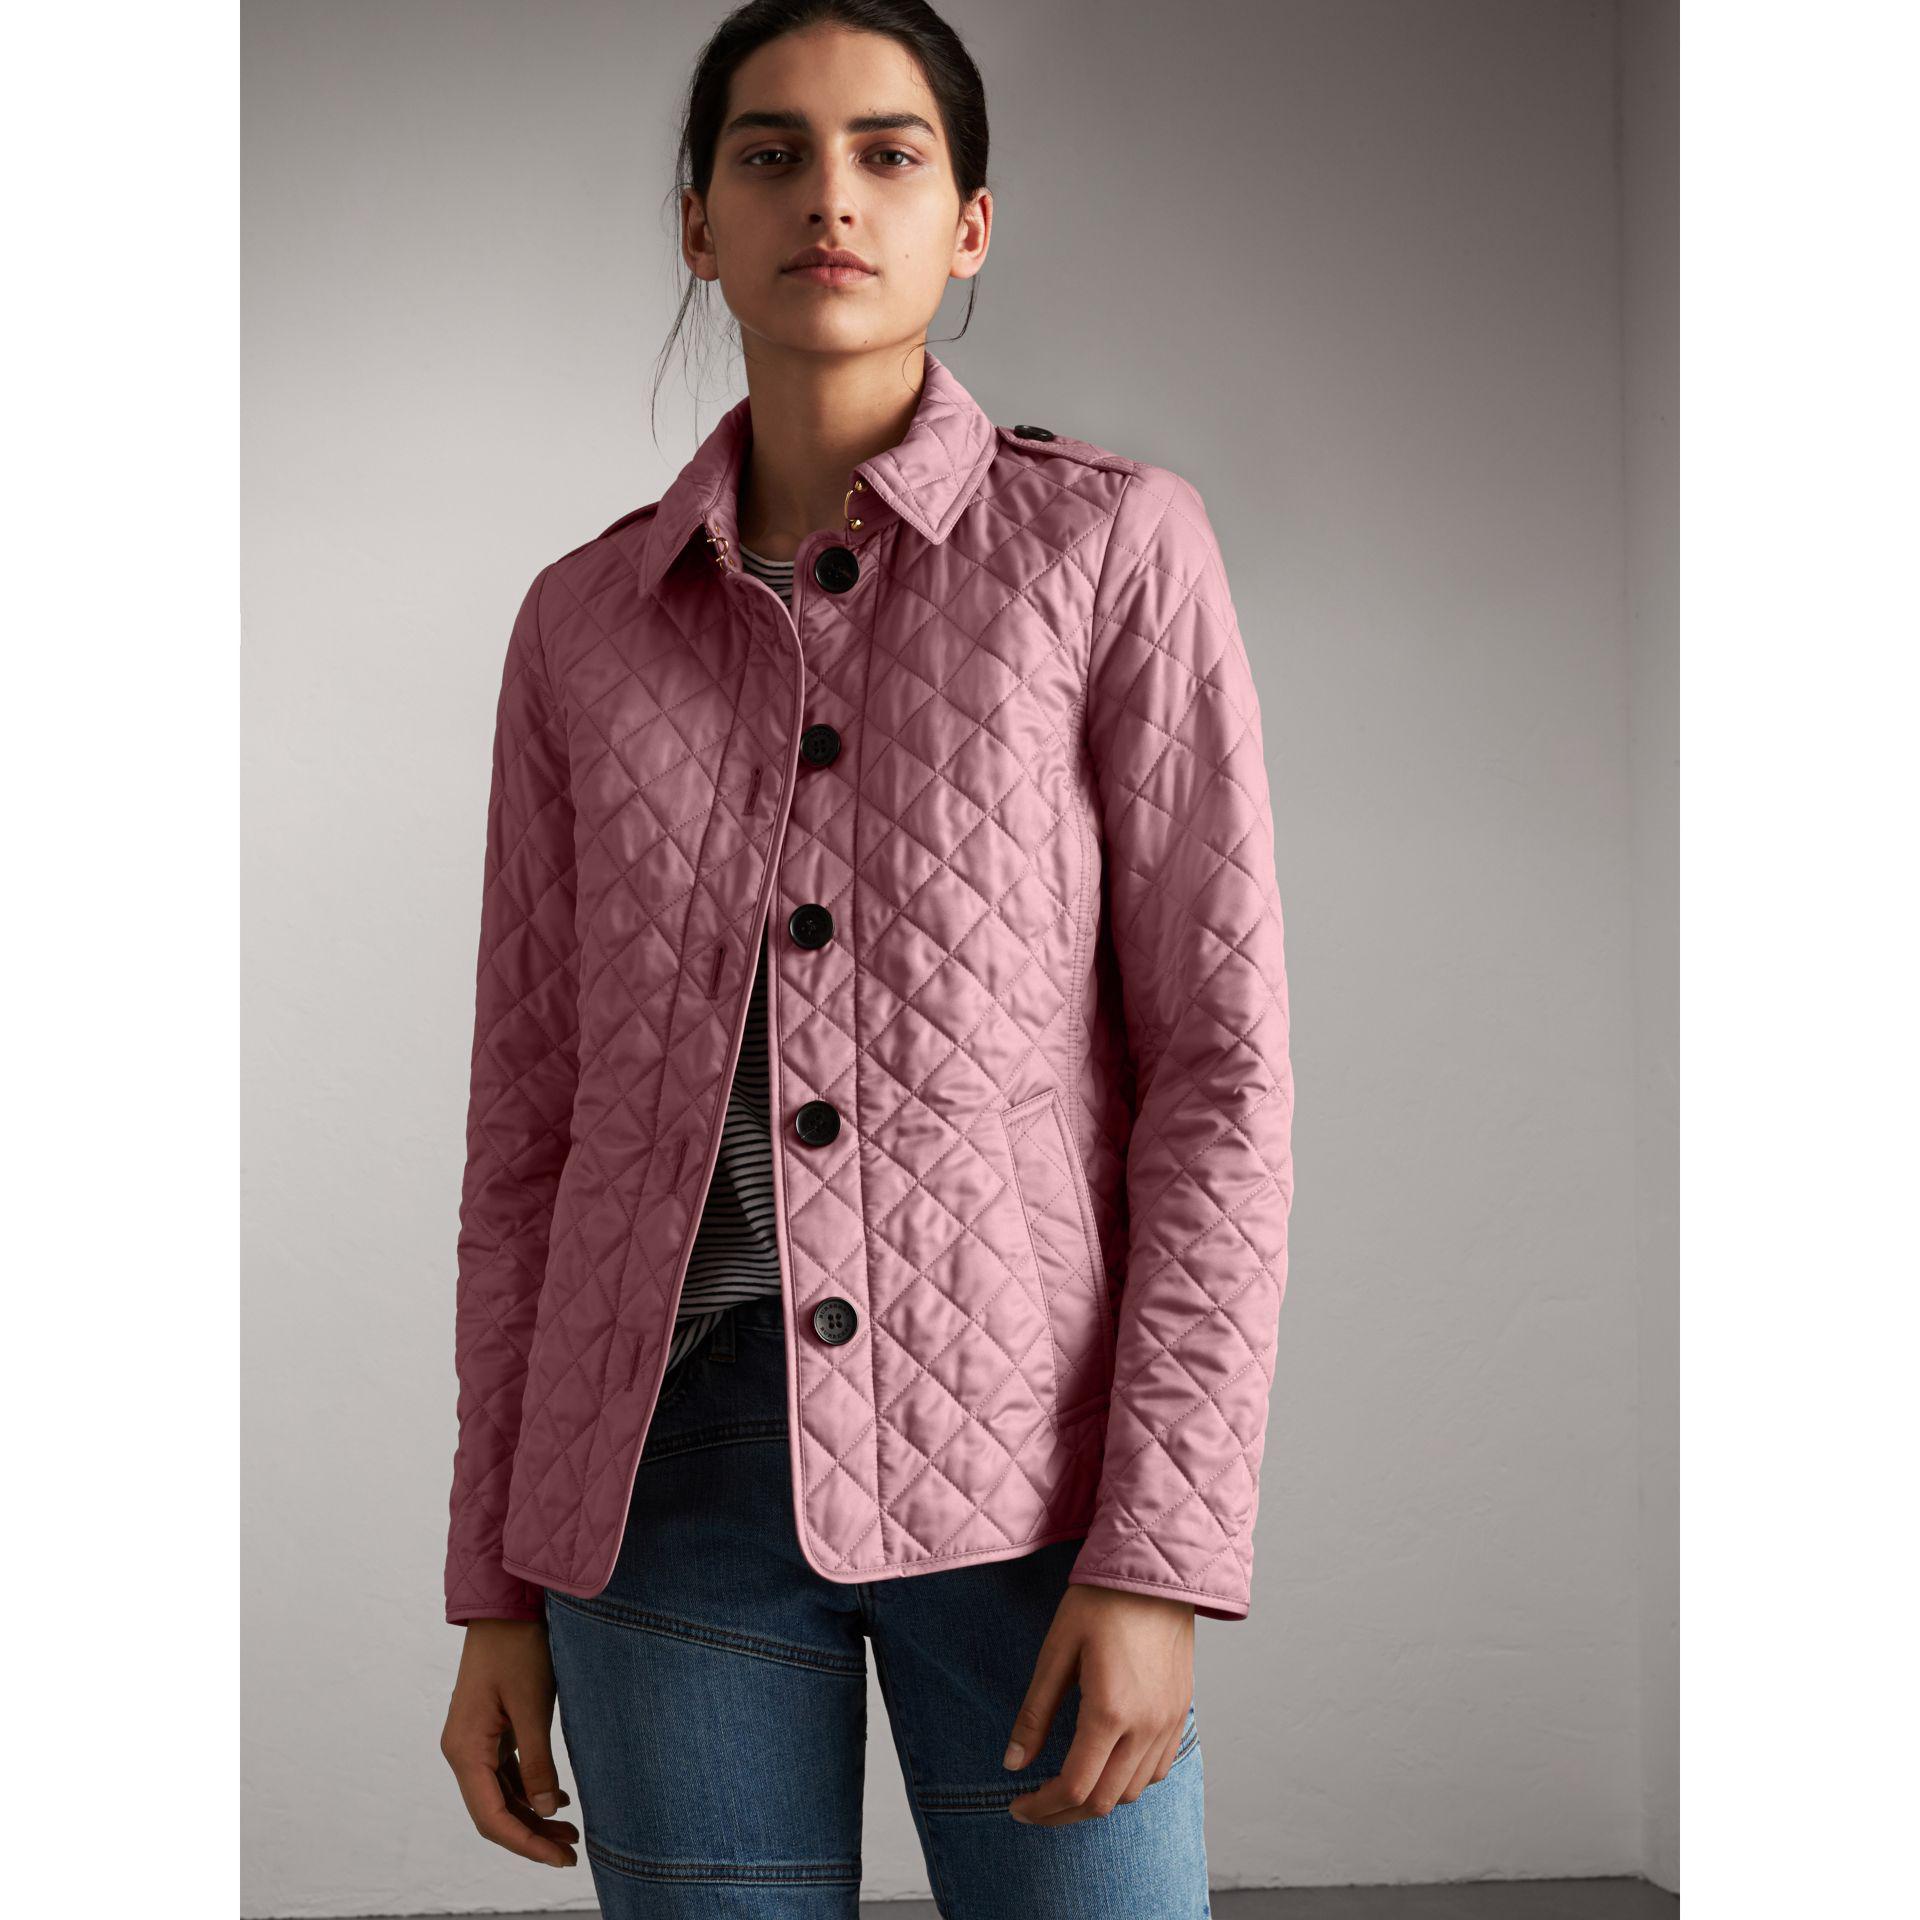 Arriba 69+ imagen how to wear burberry quilted jacket - Abzlocal.mx